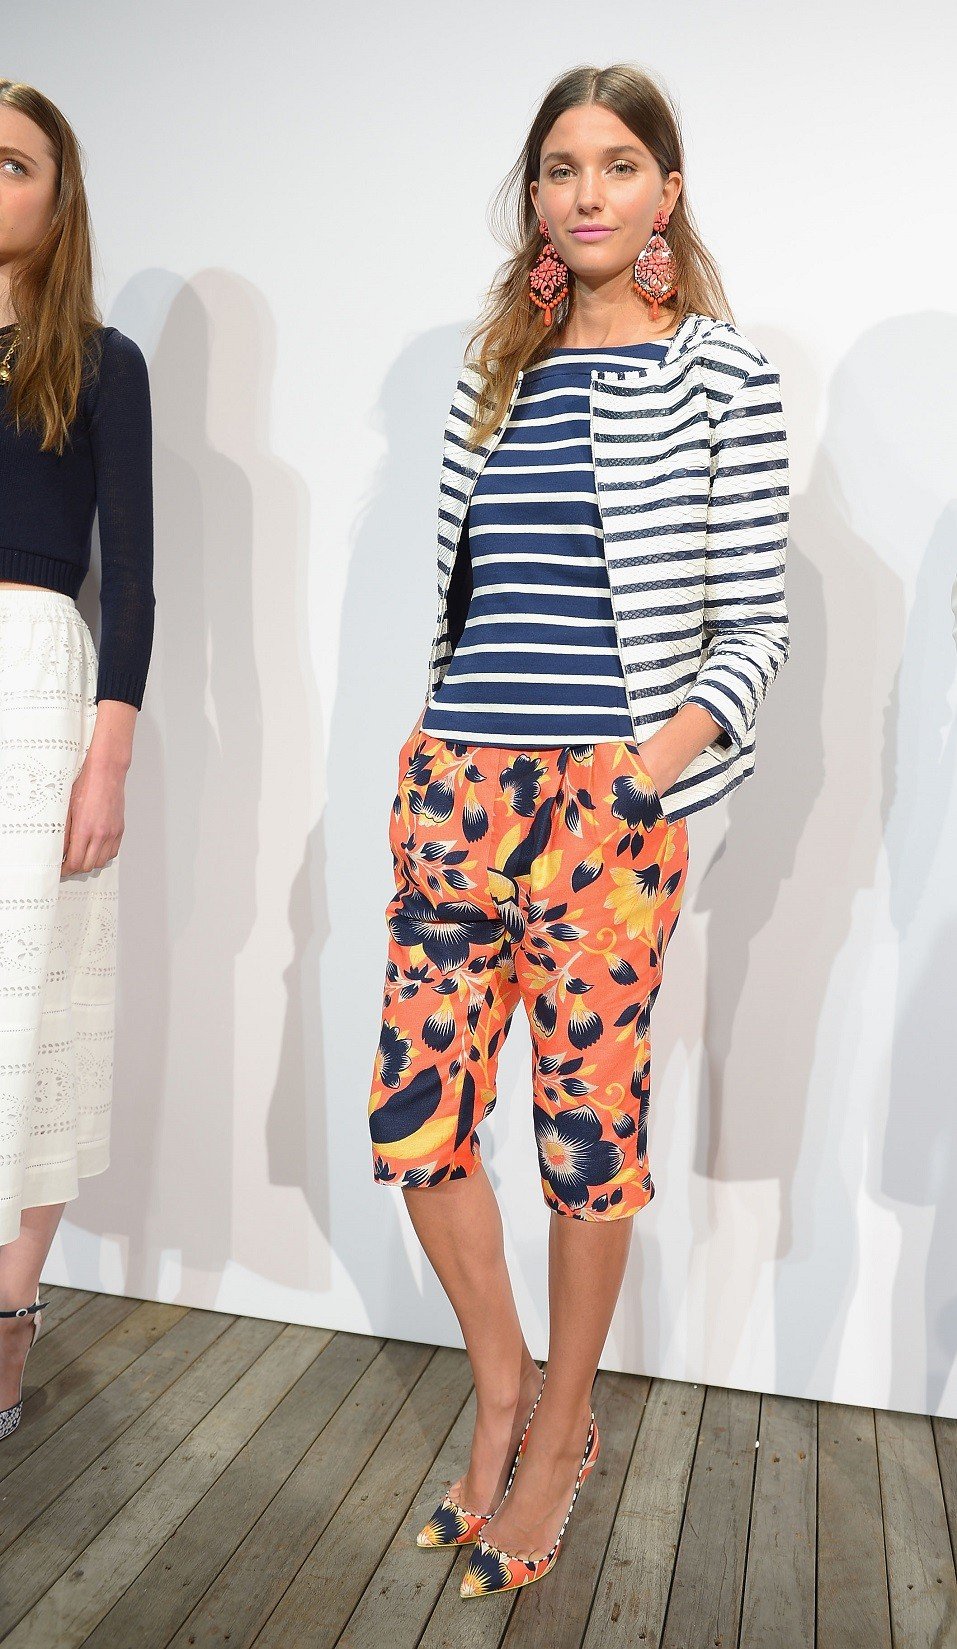 A model poses on the runway at the J.Crew presentation during Mercedes-Benz Fashion Week